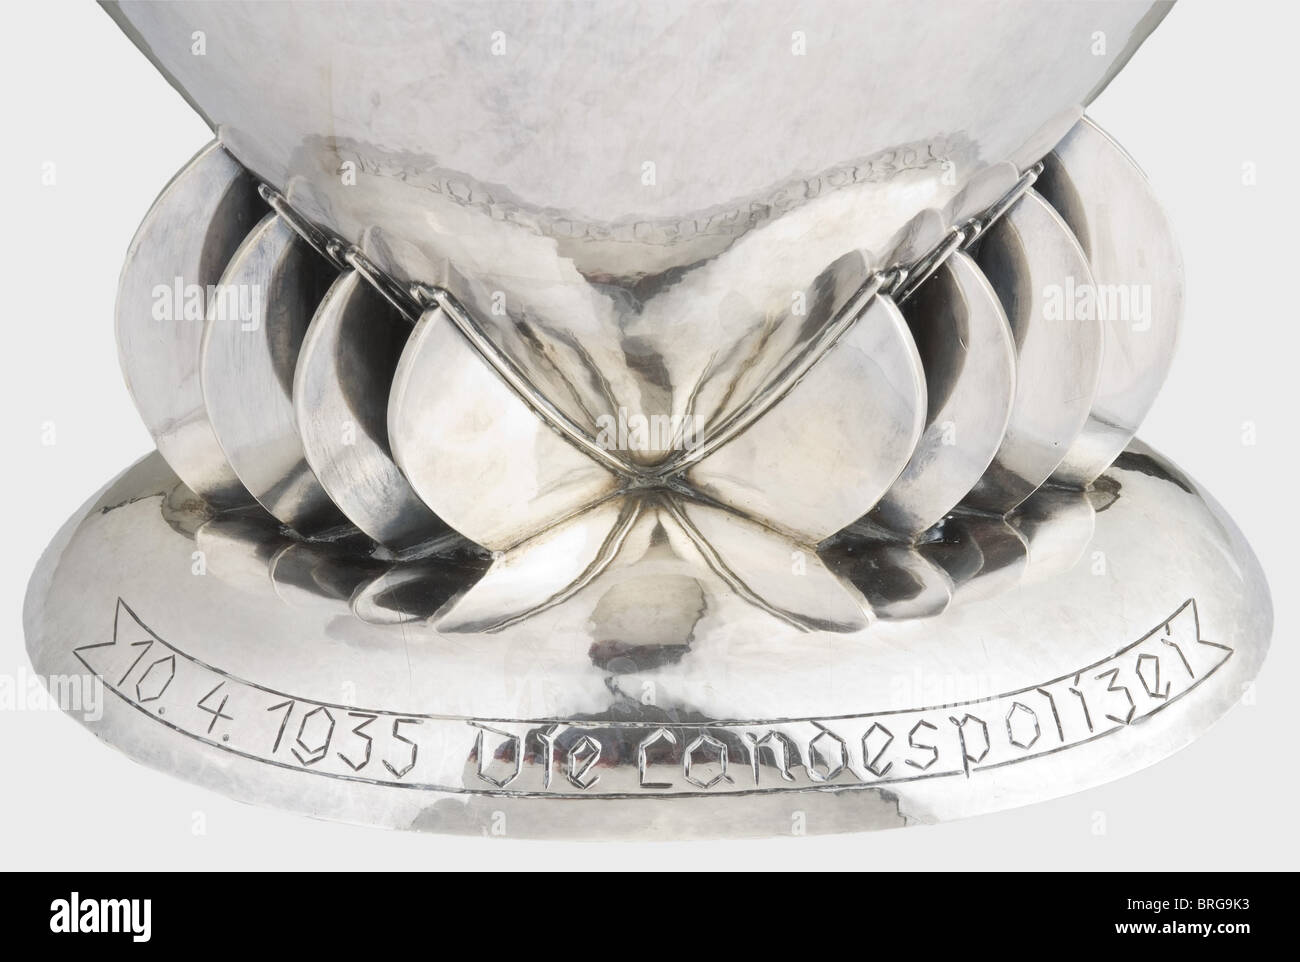 Hermann Göring - Emmy Sonnemann,a wedding present of the Prussian police force 1935 Large,hand-hammered silver vase with engraved emblem of the Prussian police with banner(transl.)'God with us!' and the dedication inscription(transl.)'To our General Göring - 10.4.1935 the Prussian Police'. Master mark 'HJ Wilm Berlin',master monogram 'FR',on the base the company mark 'H.J. Wilm Berlin',(transl.)'hand beaten' and '925',Height 38 cm. Width 33 cm,weight 3600 g. Provenance: Keith Wilson Collection,Kansas City. Göring's wedding with the famous actress E,Additional-Rights-Clearences-Not Available Stock Photo